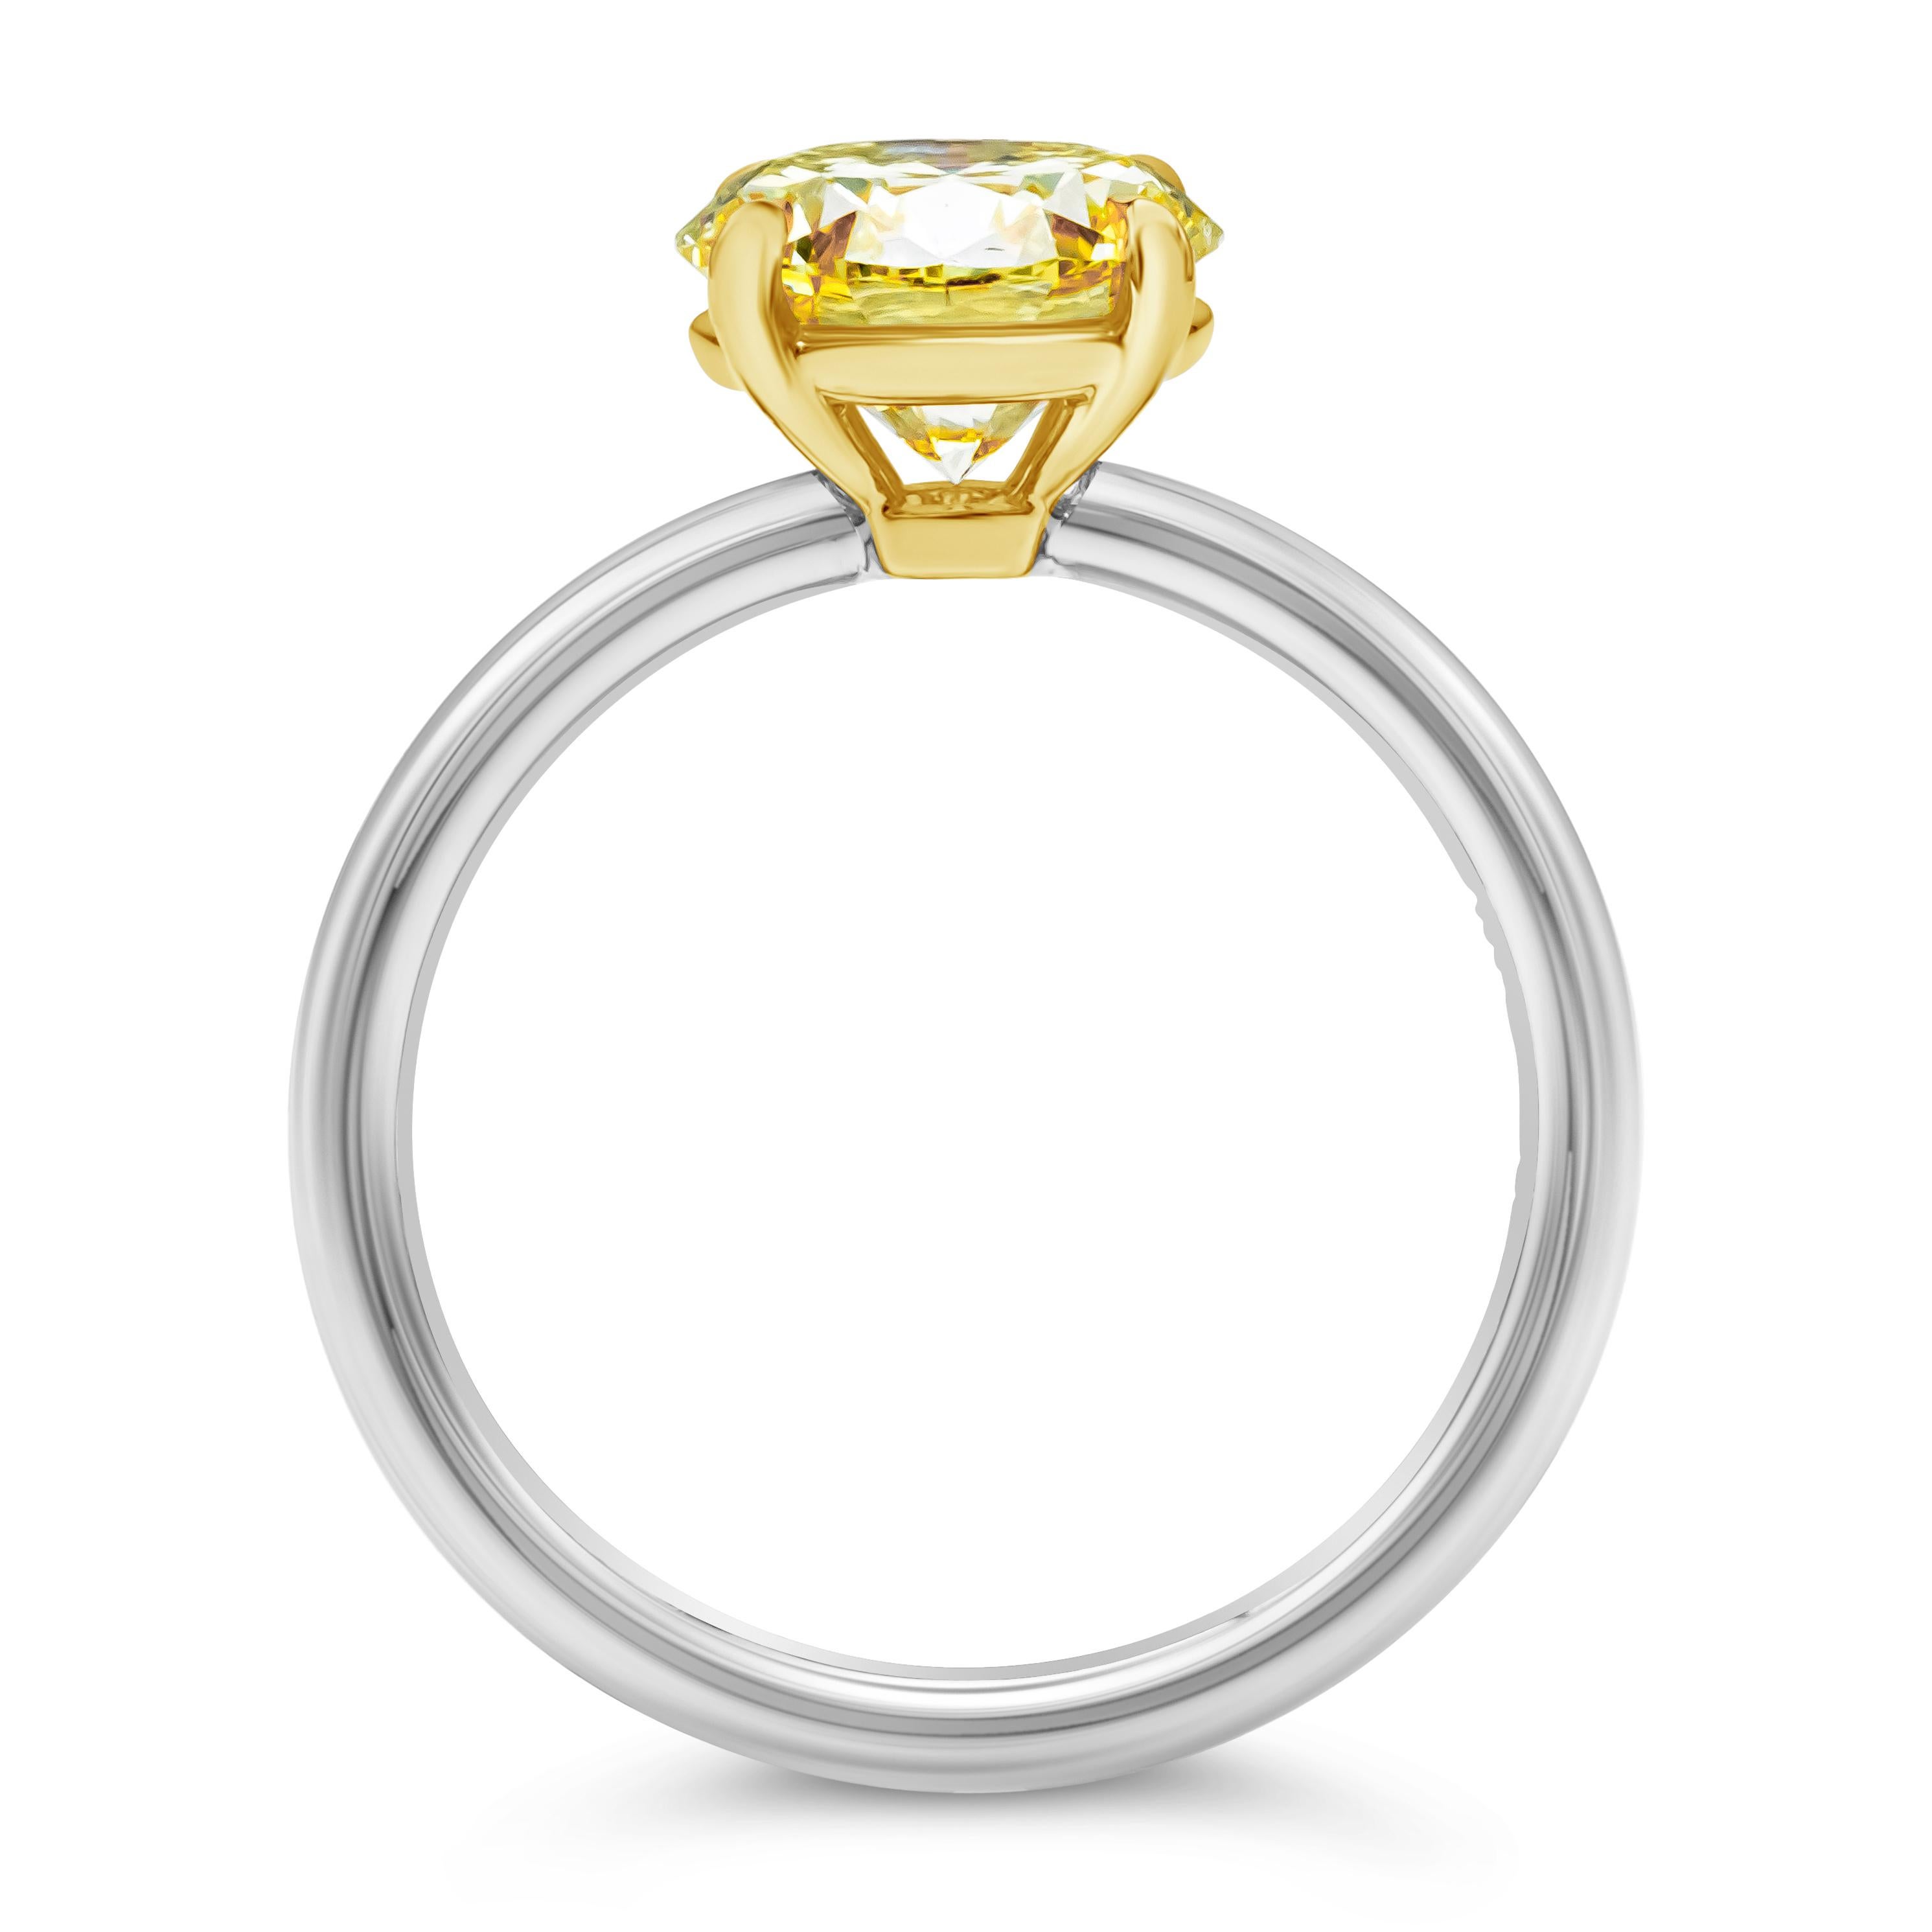 Contemporary Roman Malakov, 2 Carat Total Fancy Light Yellow Solitaire Diamond Ring For Sale